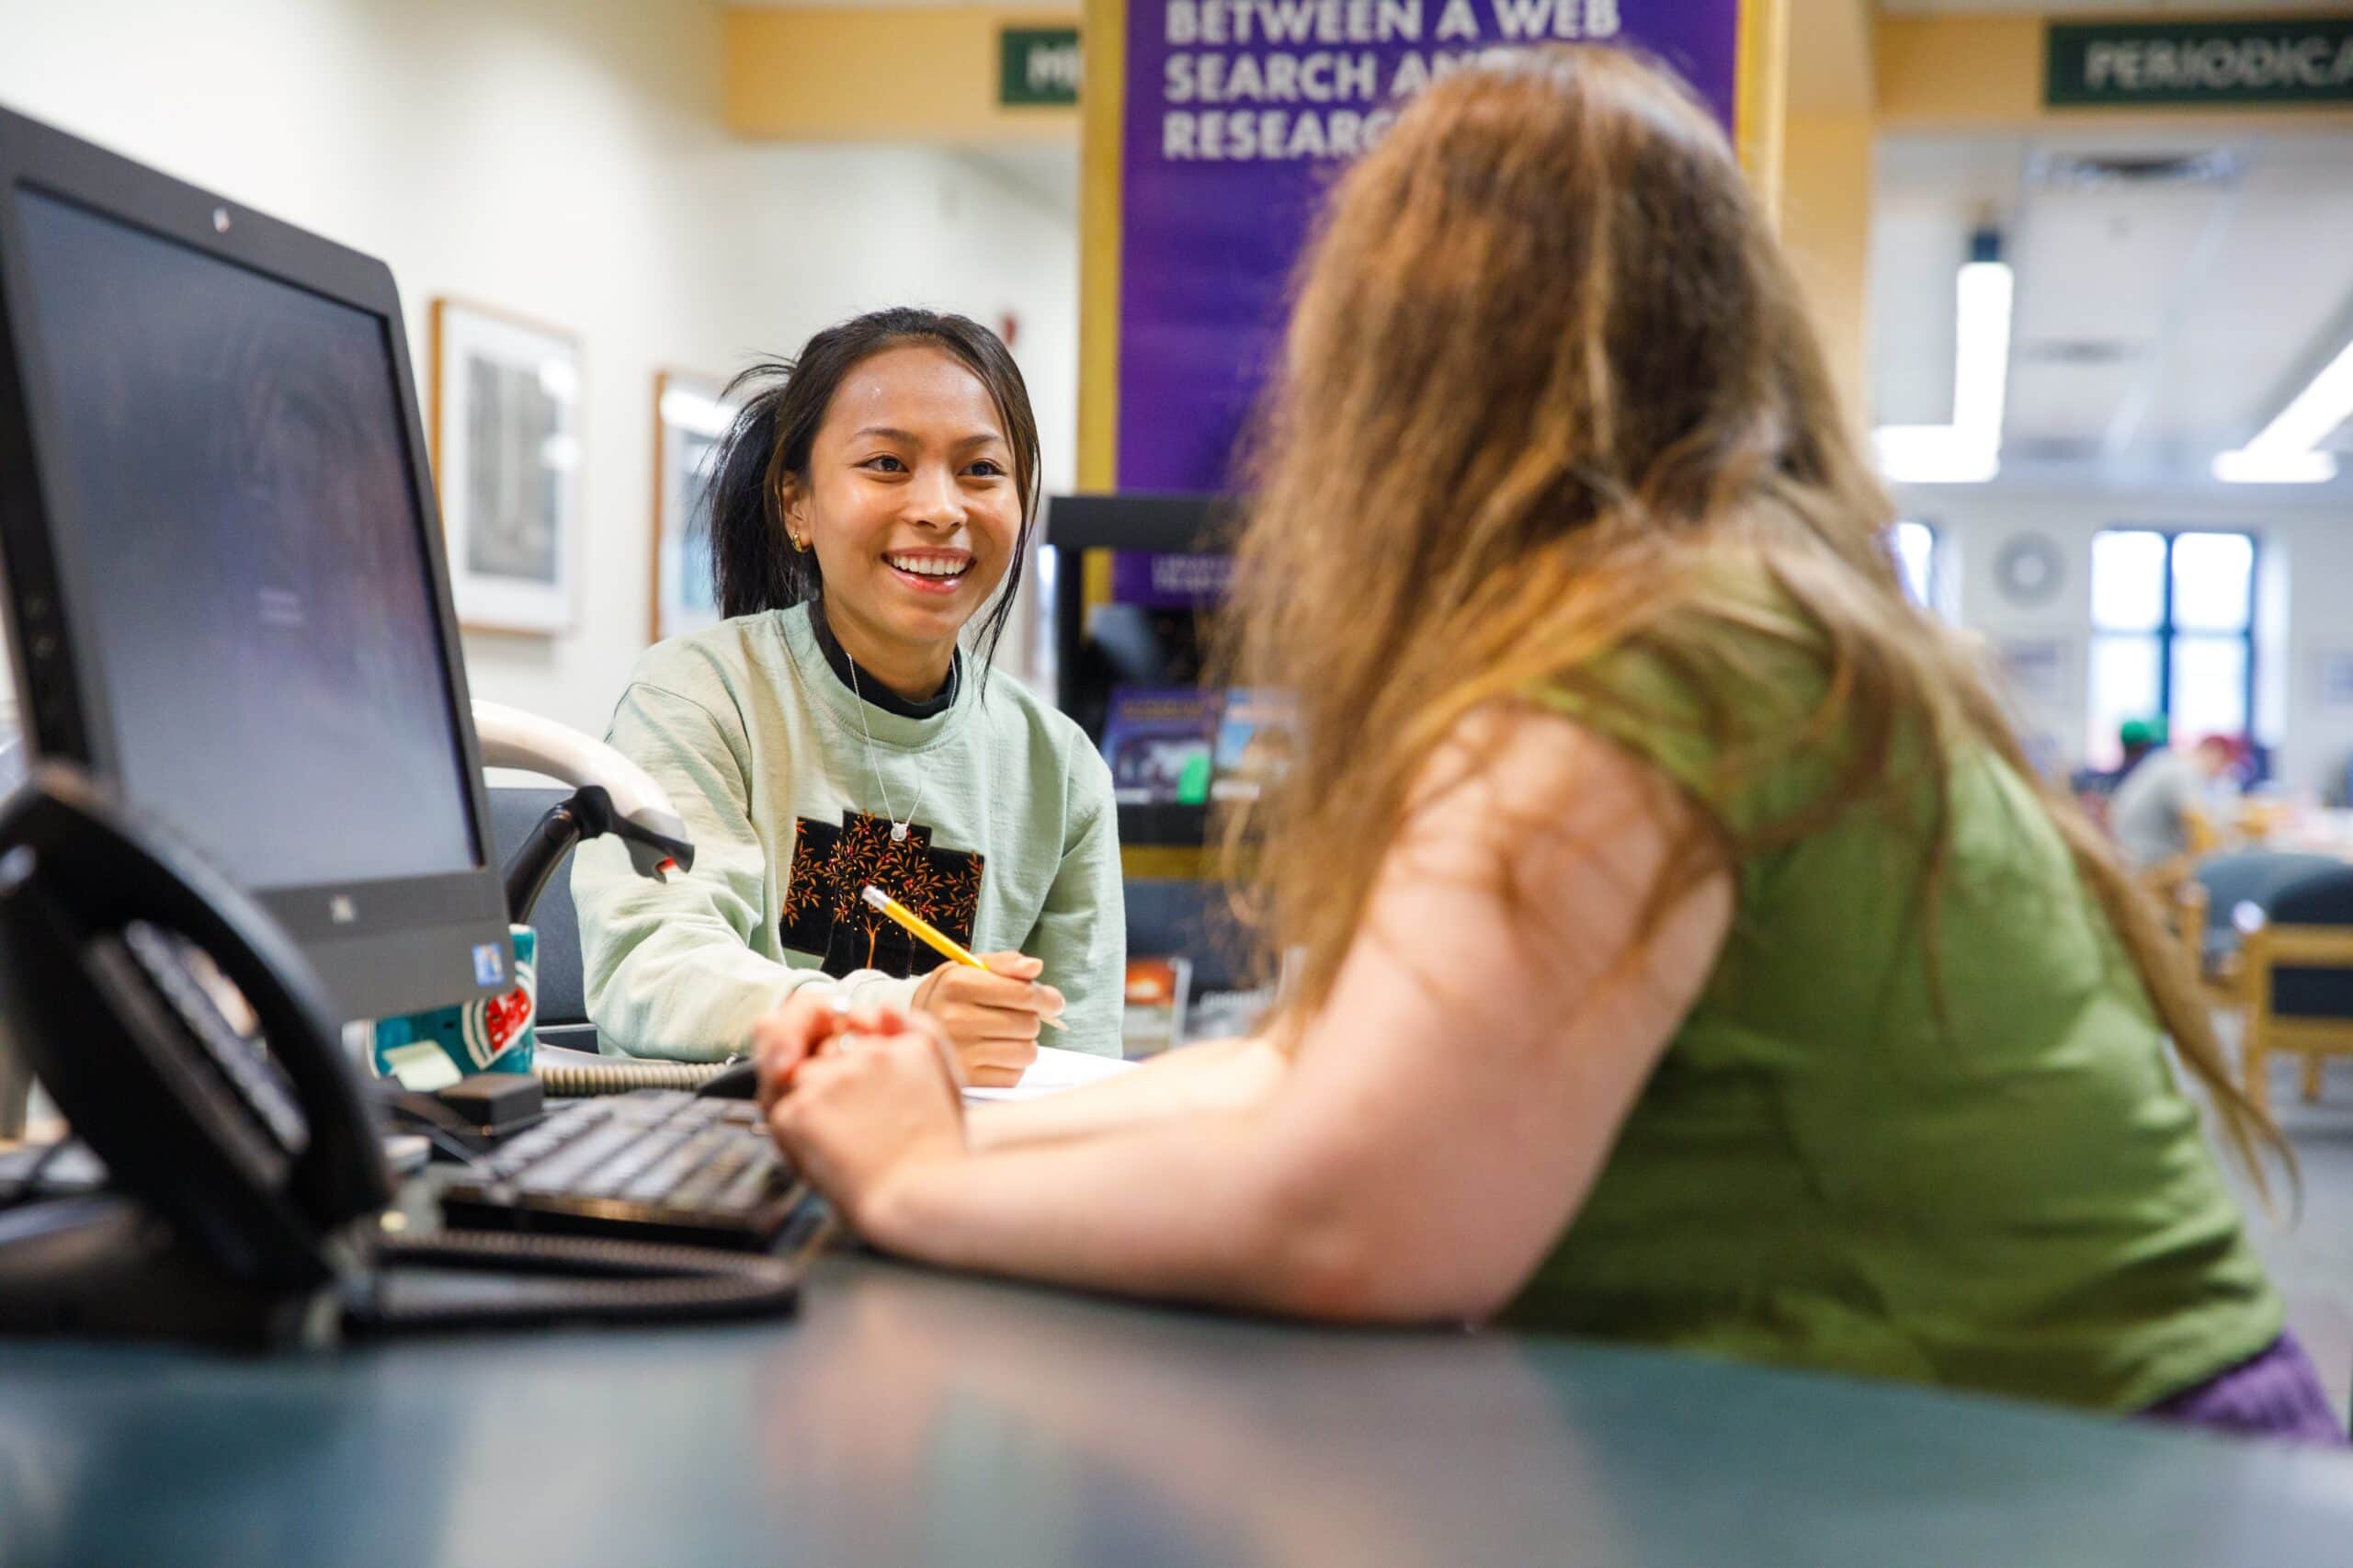 A student smiling at a librarian as they do research at a computer.